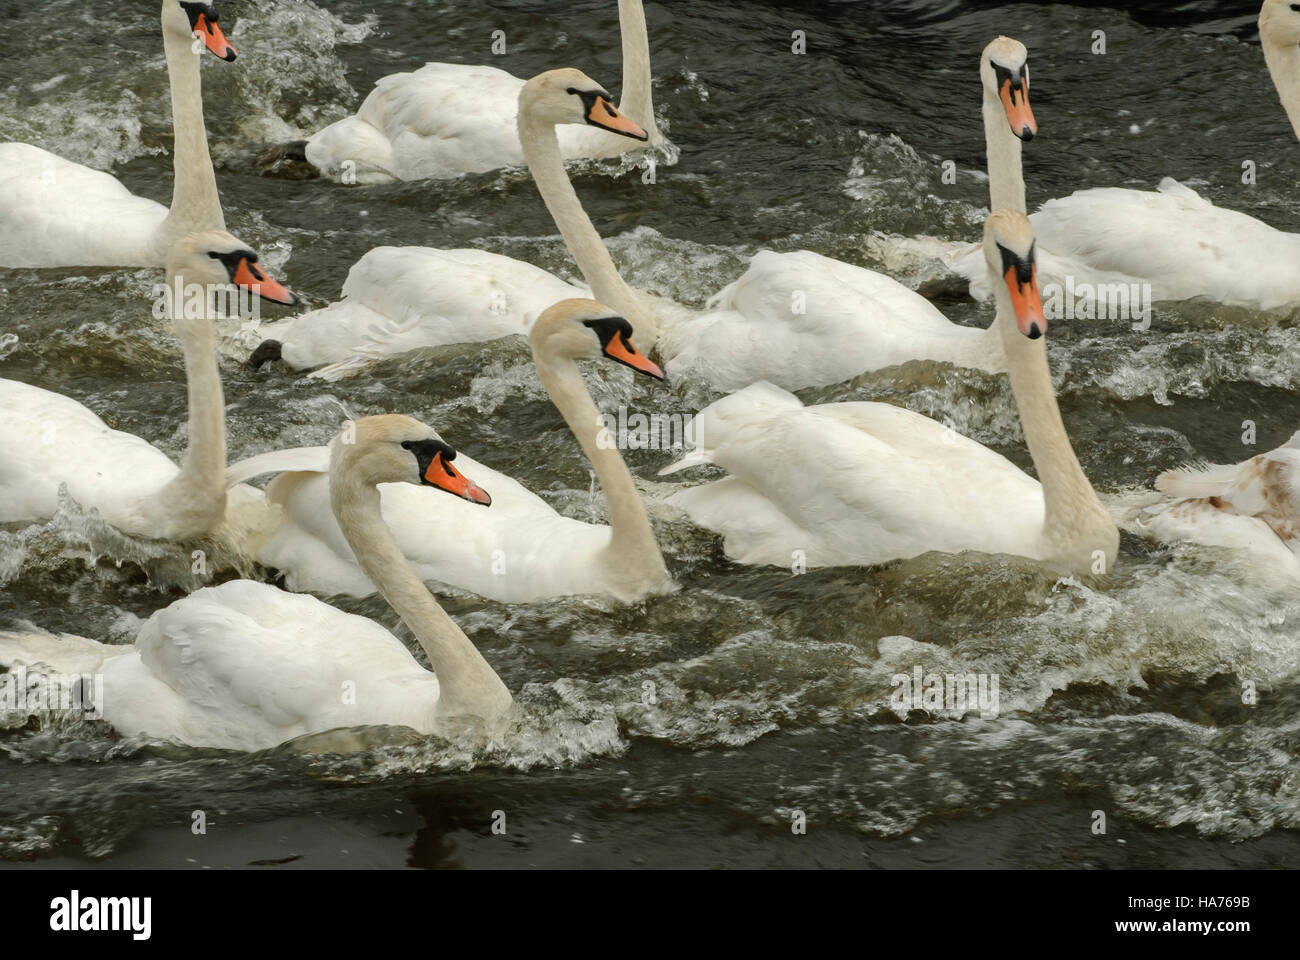 A group or bevy of mute swans swimming in rough water on the River Tweed, Northumberland, England Stock Photo